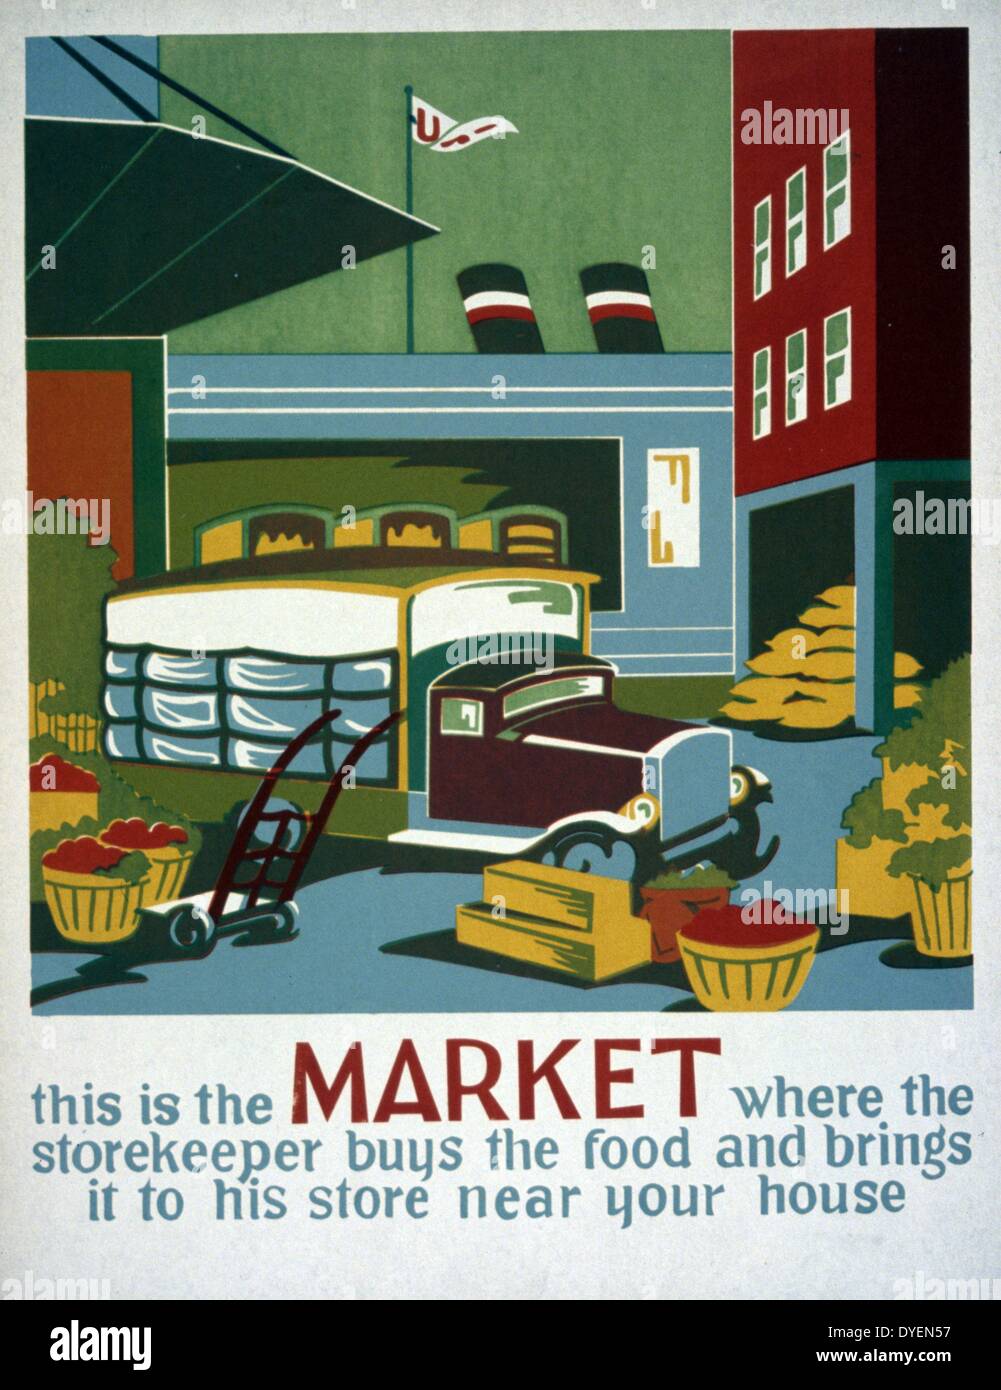 poster stating 'This is the market where the storekeeper buys the food and brings it to his store near your house'. Federal Art Project, 1936 or 1937print on board (poster), Stock Photo